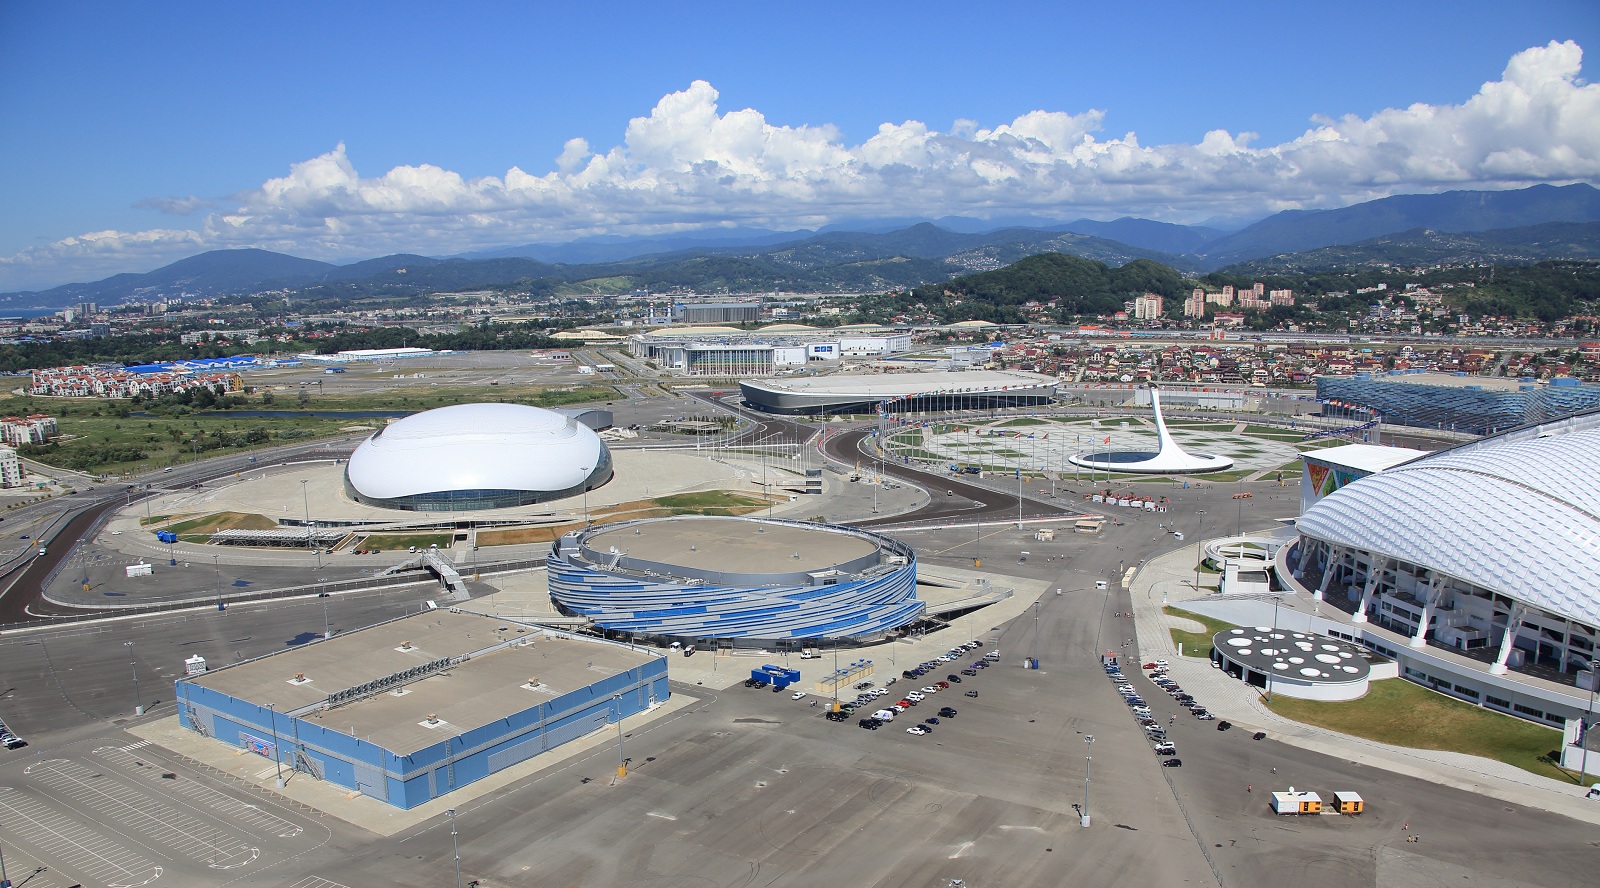 The_Olympic_Park_was_built_in_Sochi_for_the_Olympic_Games_and_is_the_largest_sports_complex_in_Russia.JPG